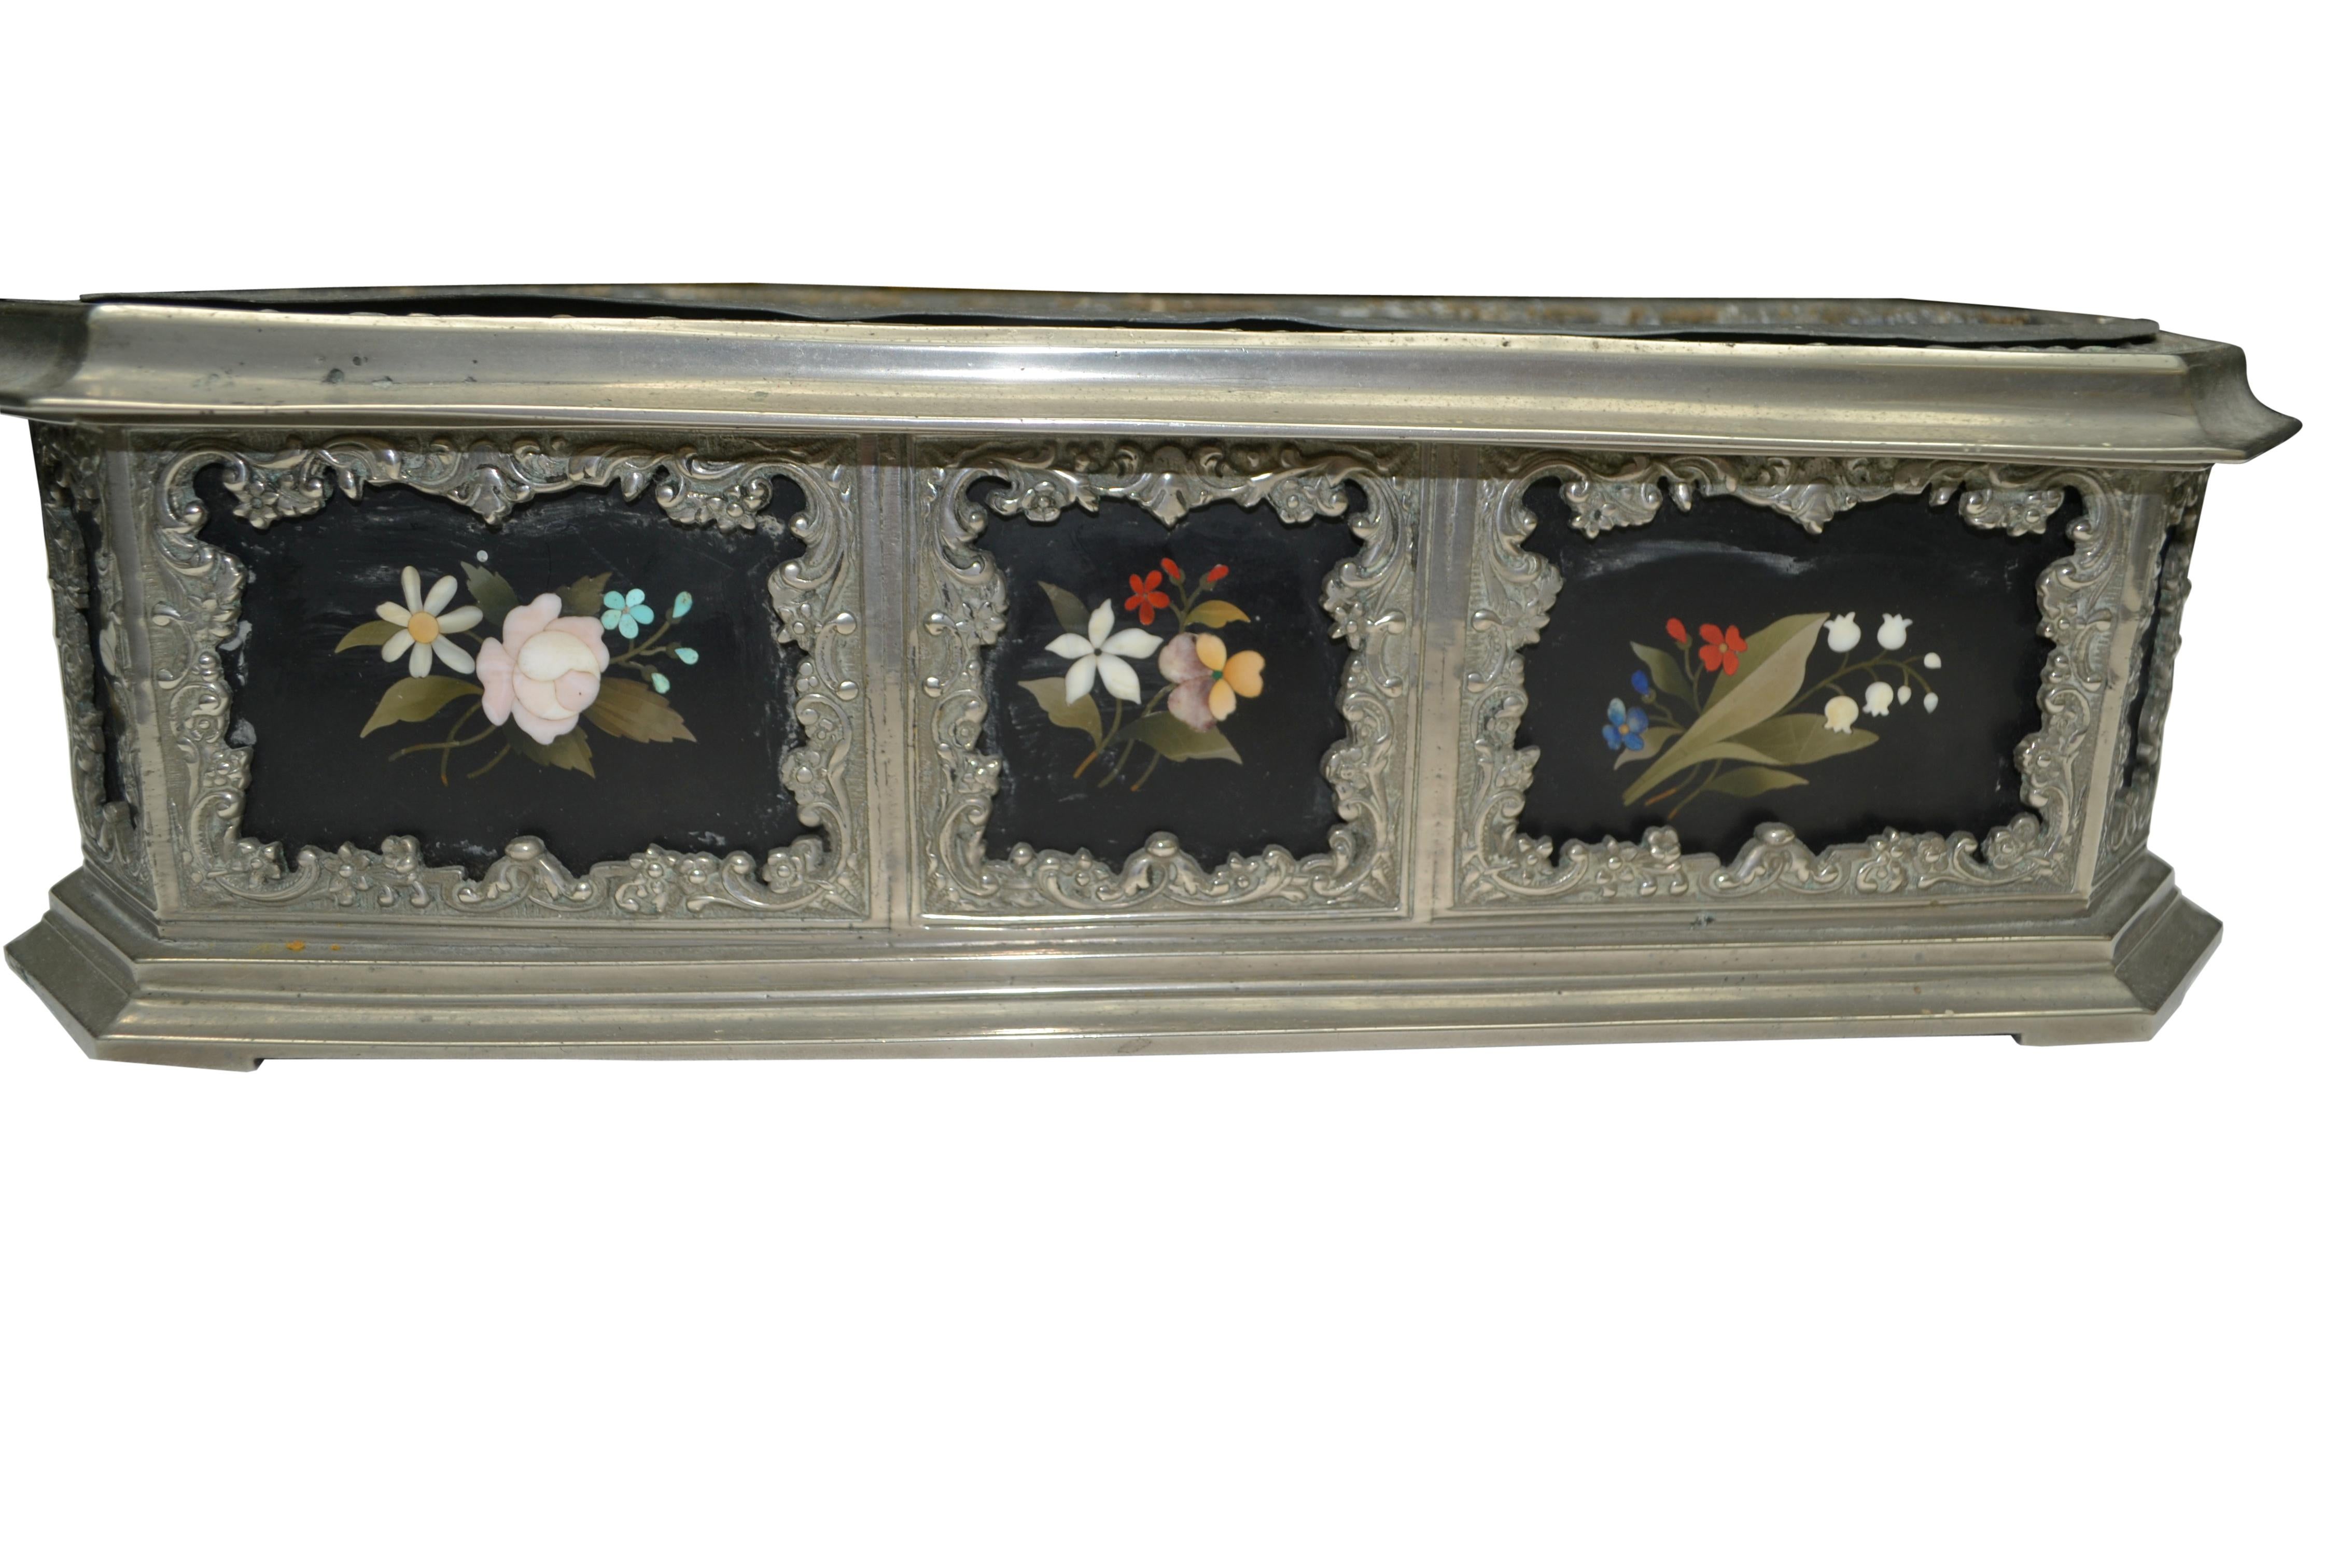 19th Century Silvered Metal and Pietra Dura Table Planter For Sale